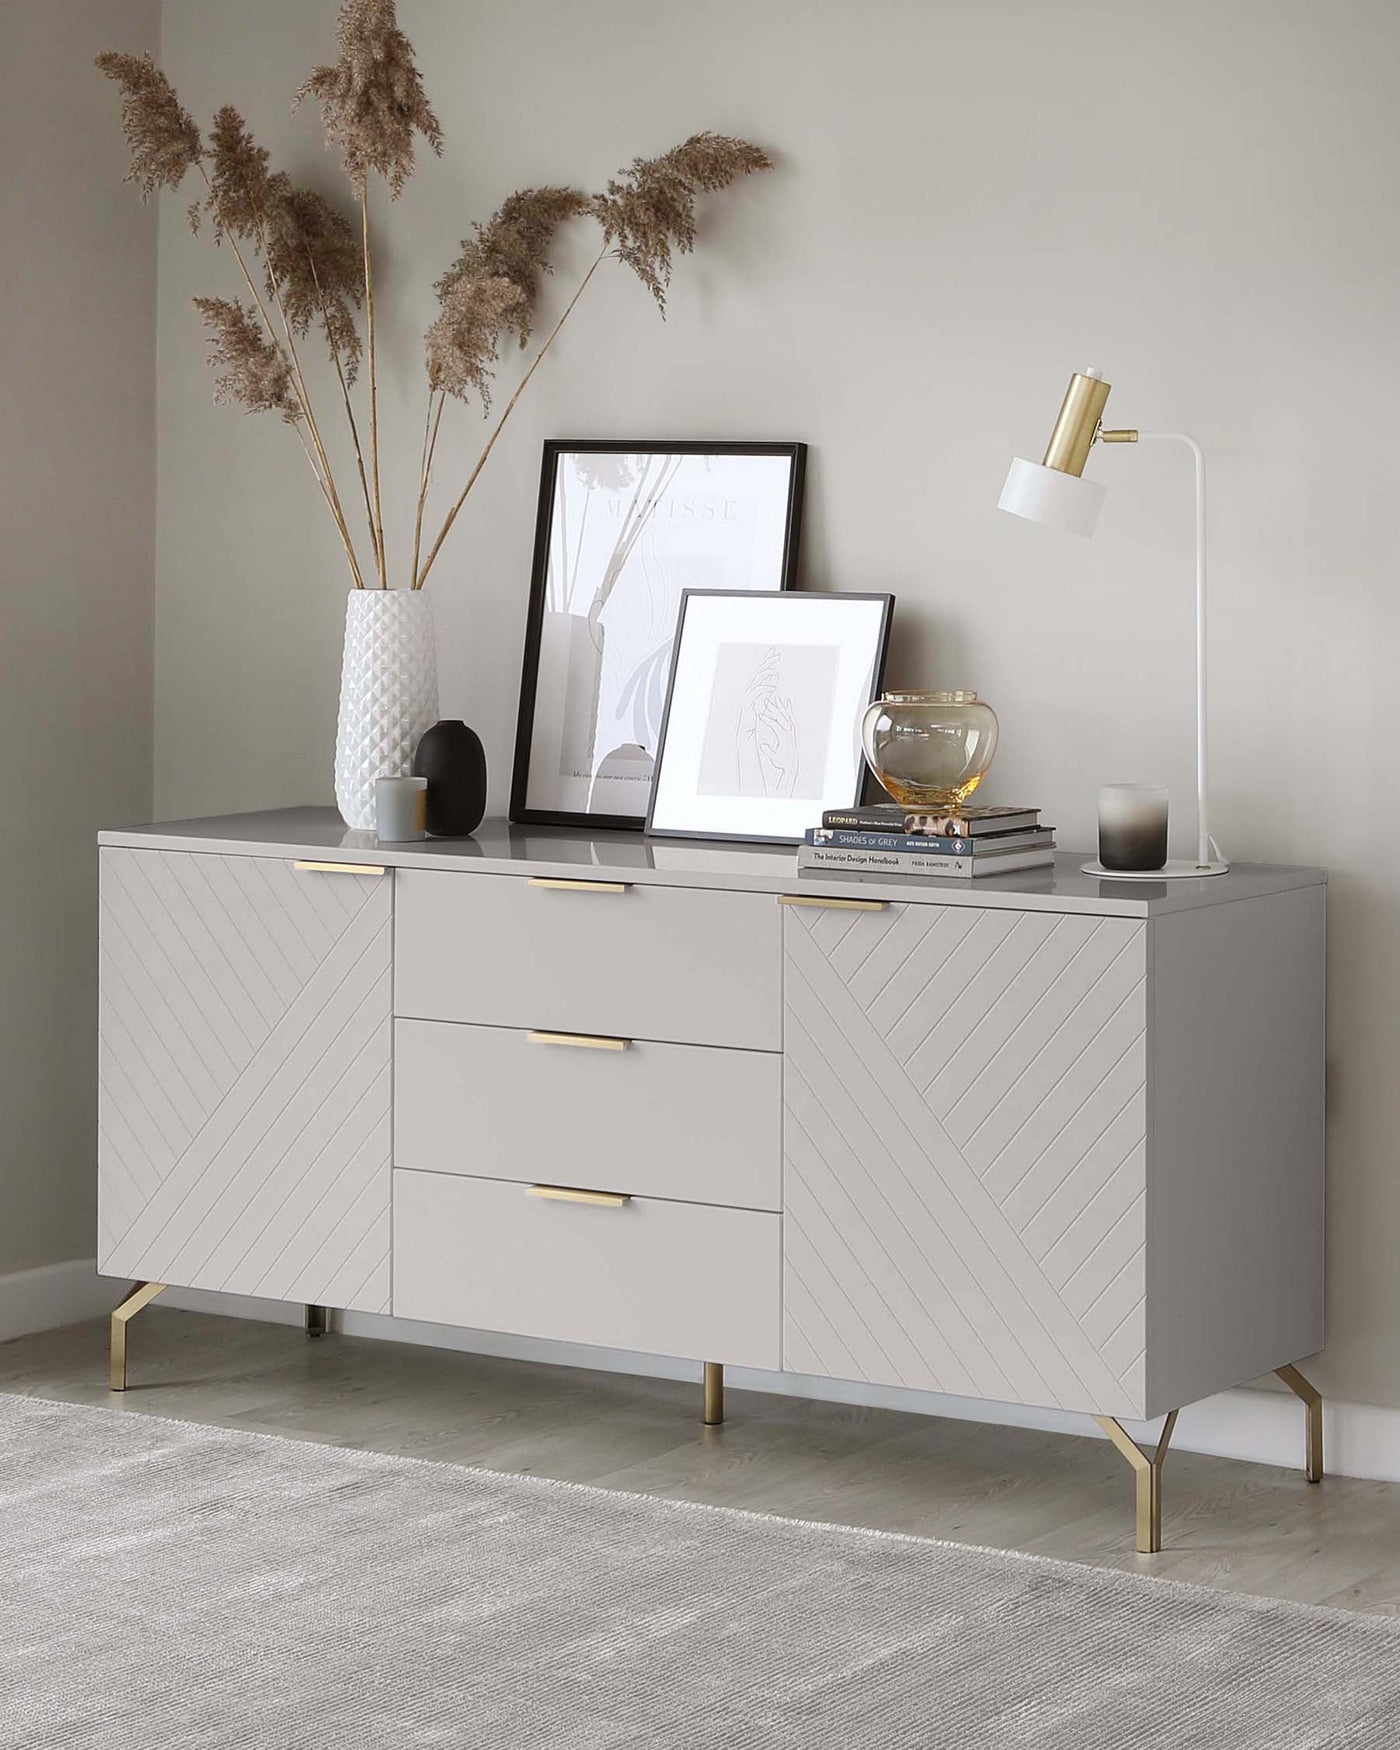 Modern light grey sideboard with geometric line detailing and brass handles and legs, styled with decorative objects and artwork on top.